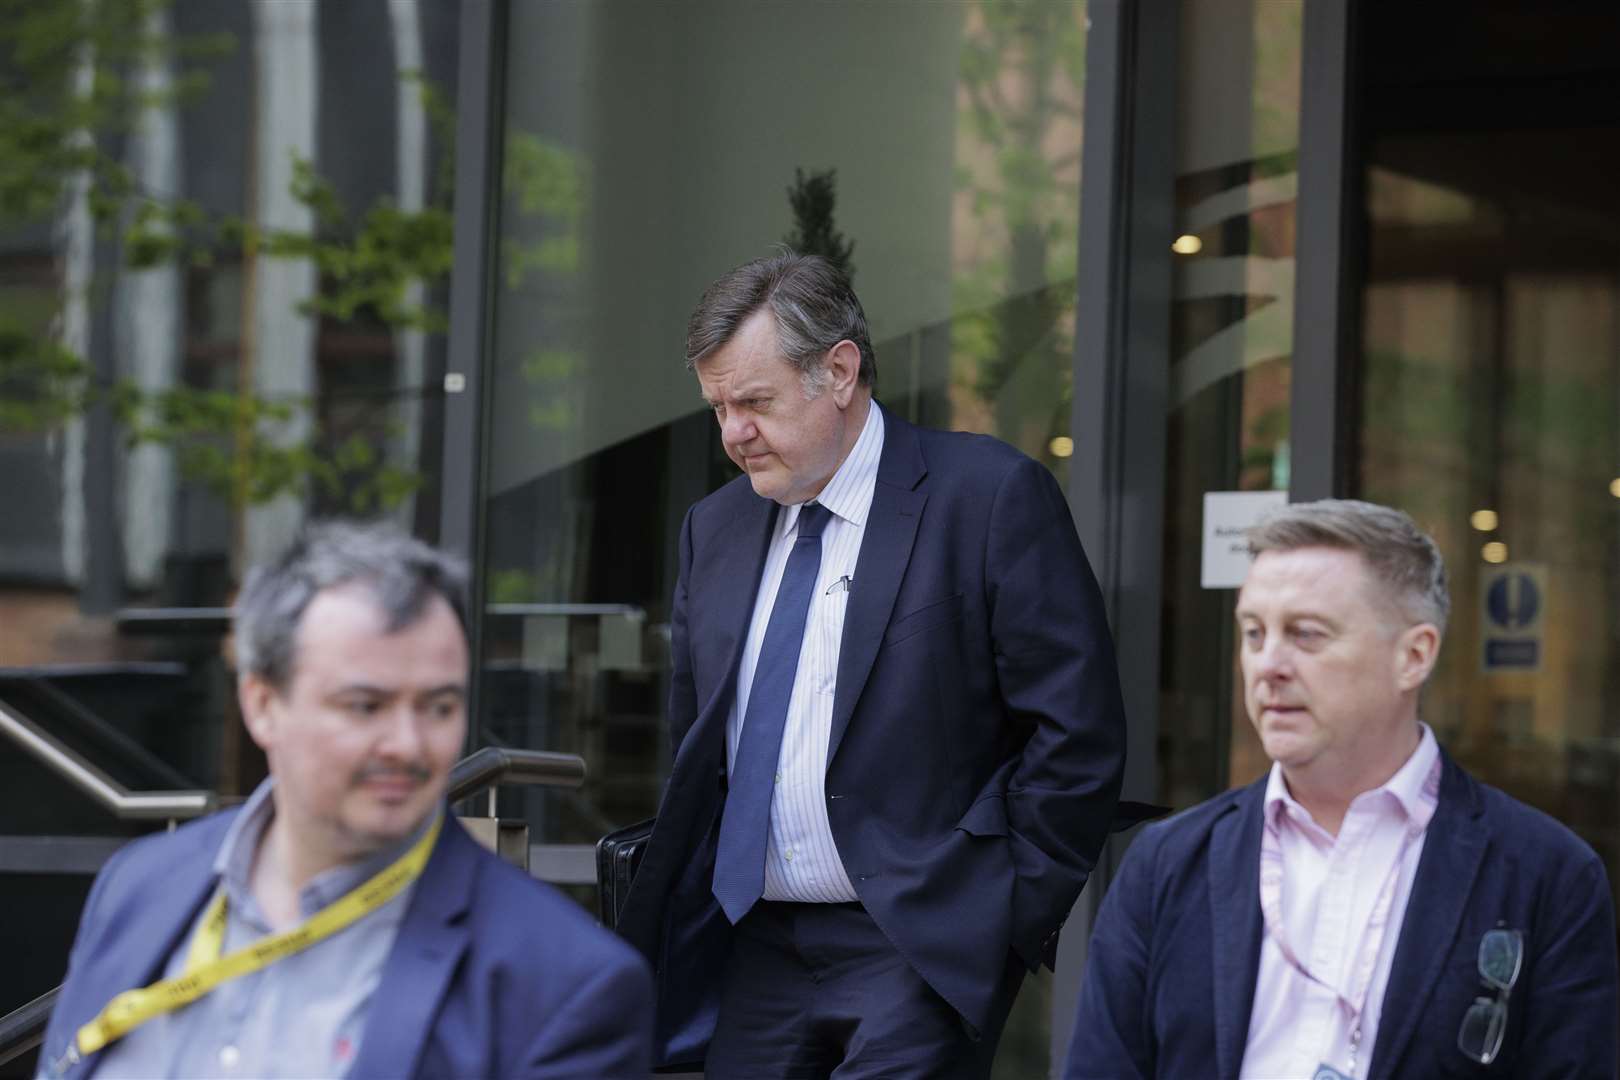 Chris Stewart (centre), leaves the Clayton Hotel in Belfast after giving evidence at the UK Covid-19 Inquiry (Liam McBurney/PA)